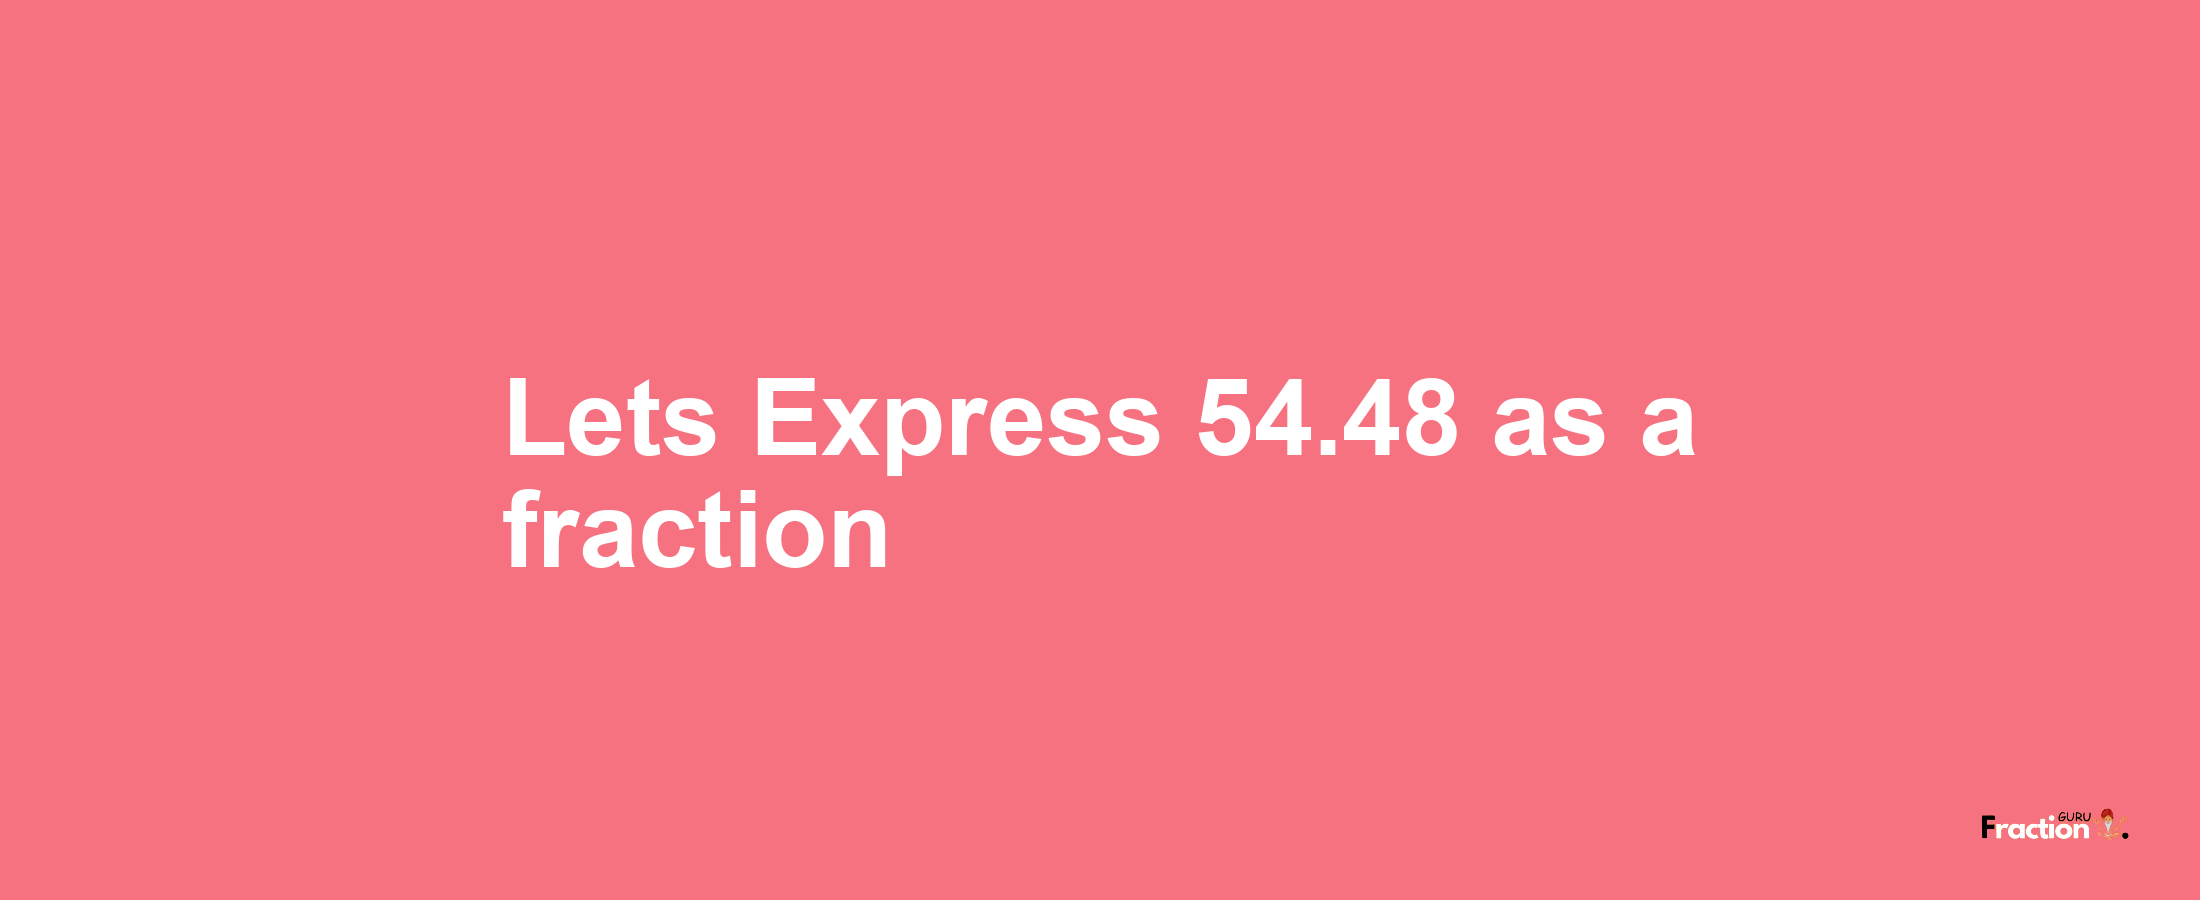 Lets Express 54.48 as afraction